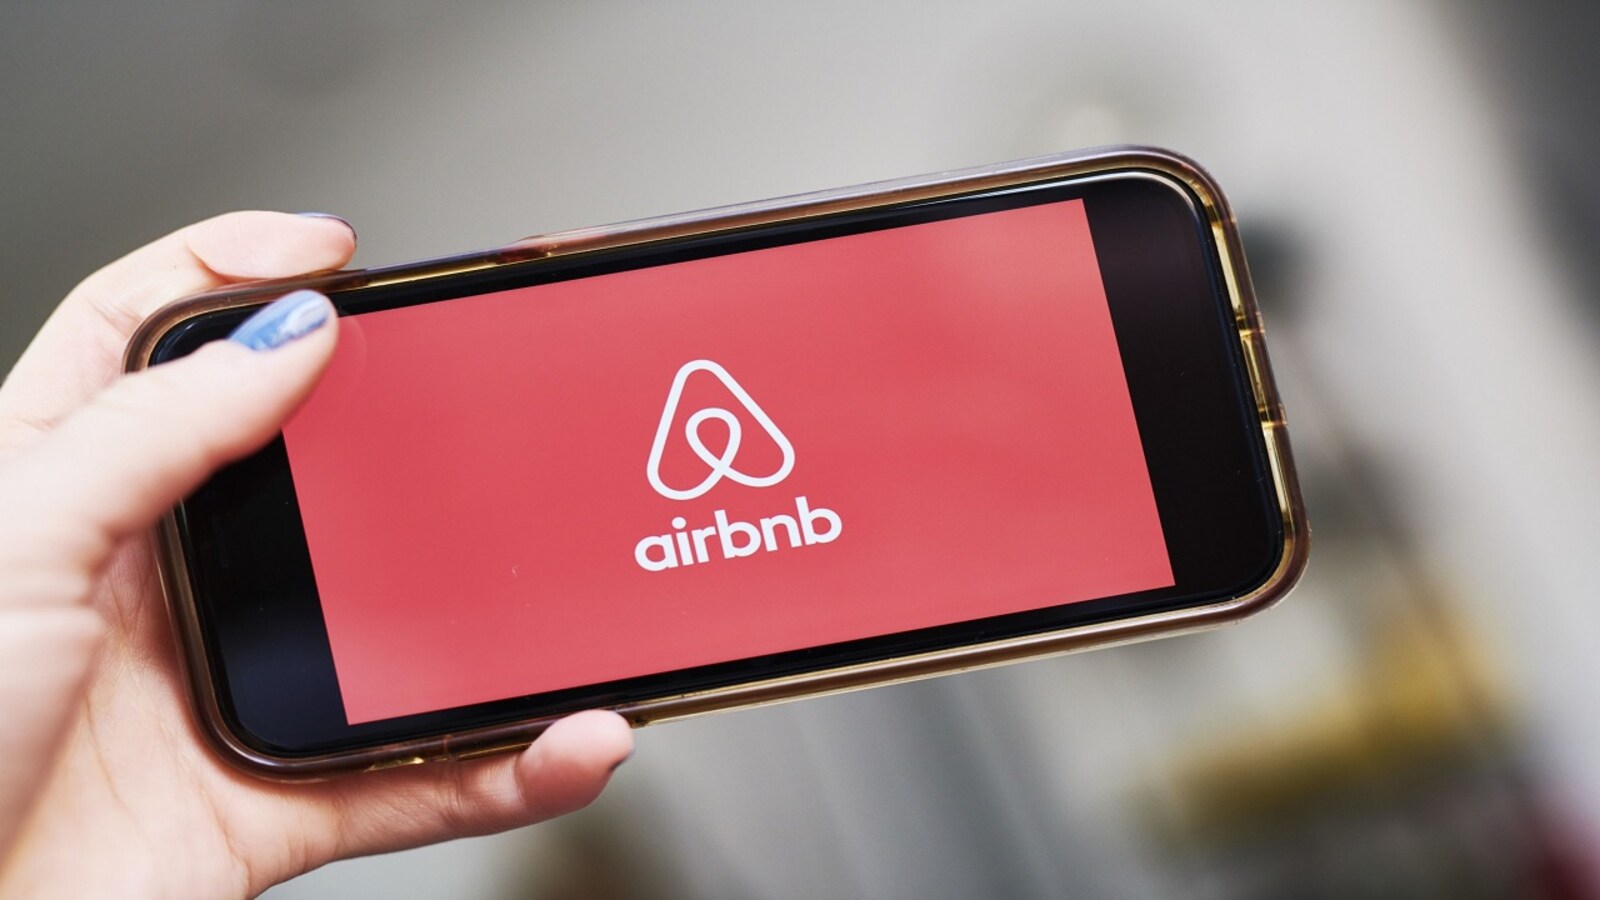 Airbnb profit jumps to $650 million in 2Q, as bookings increase